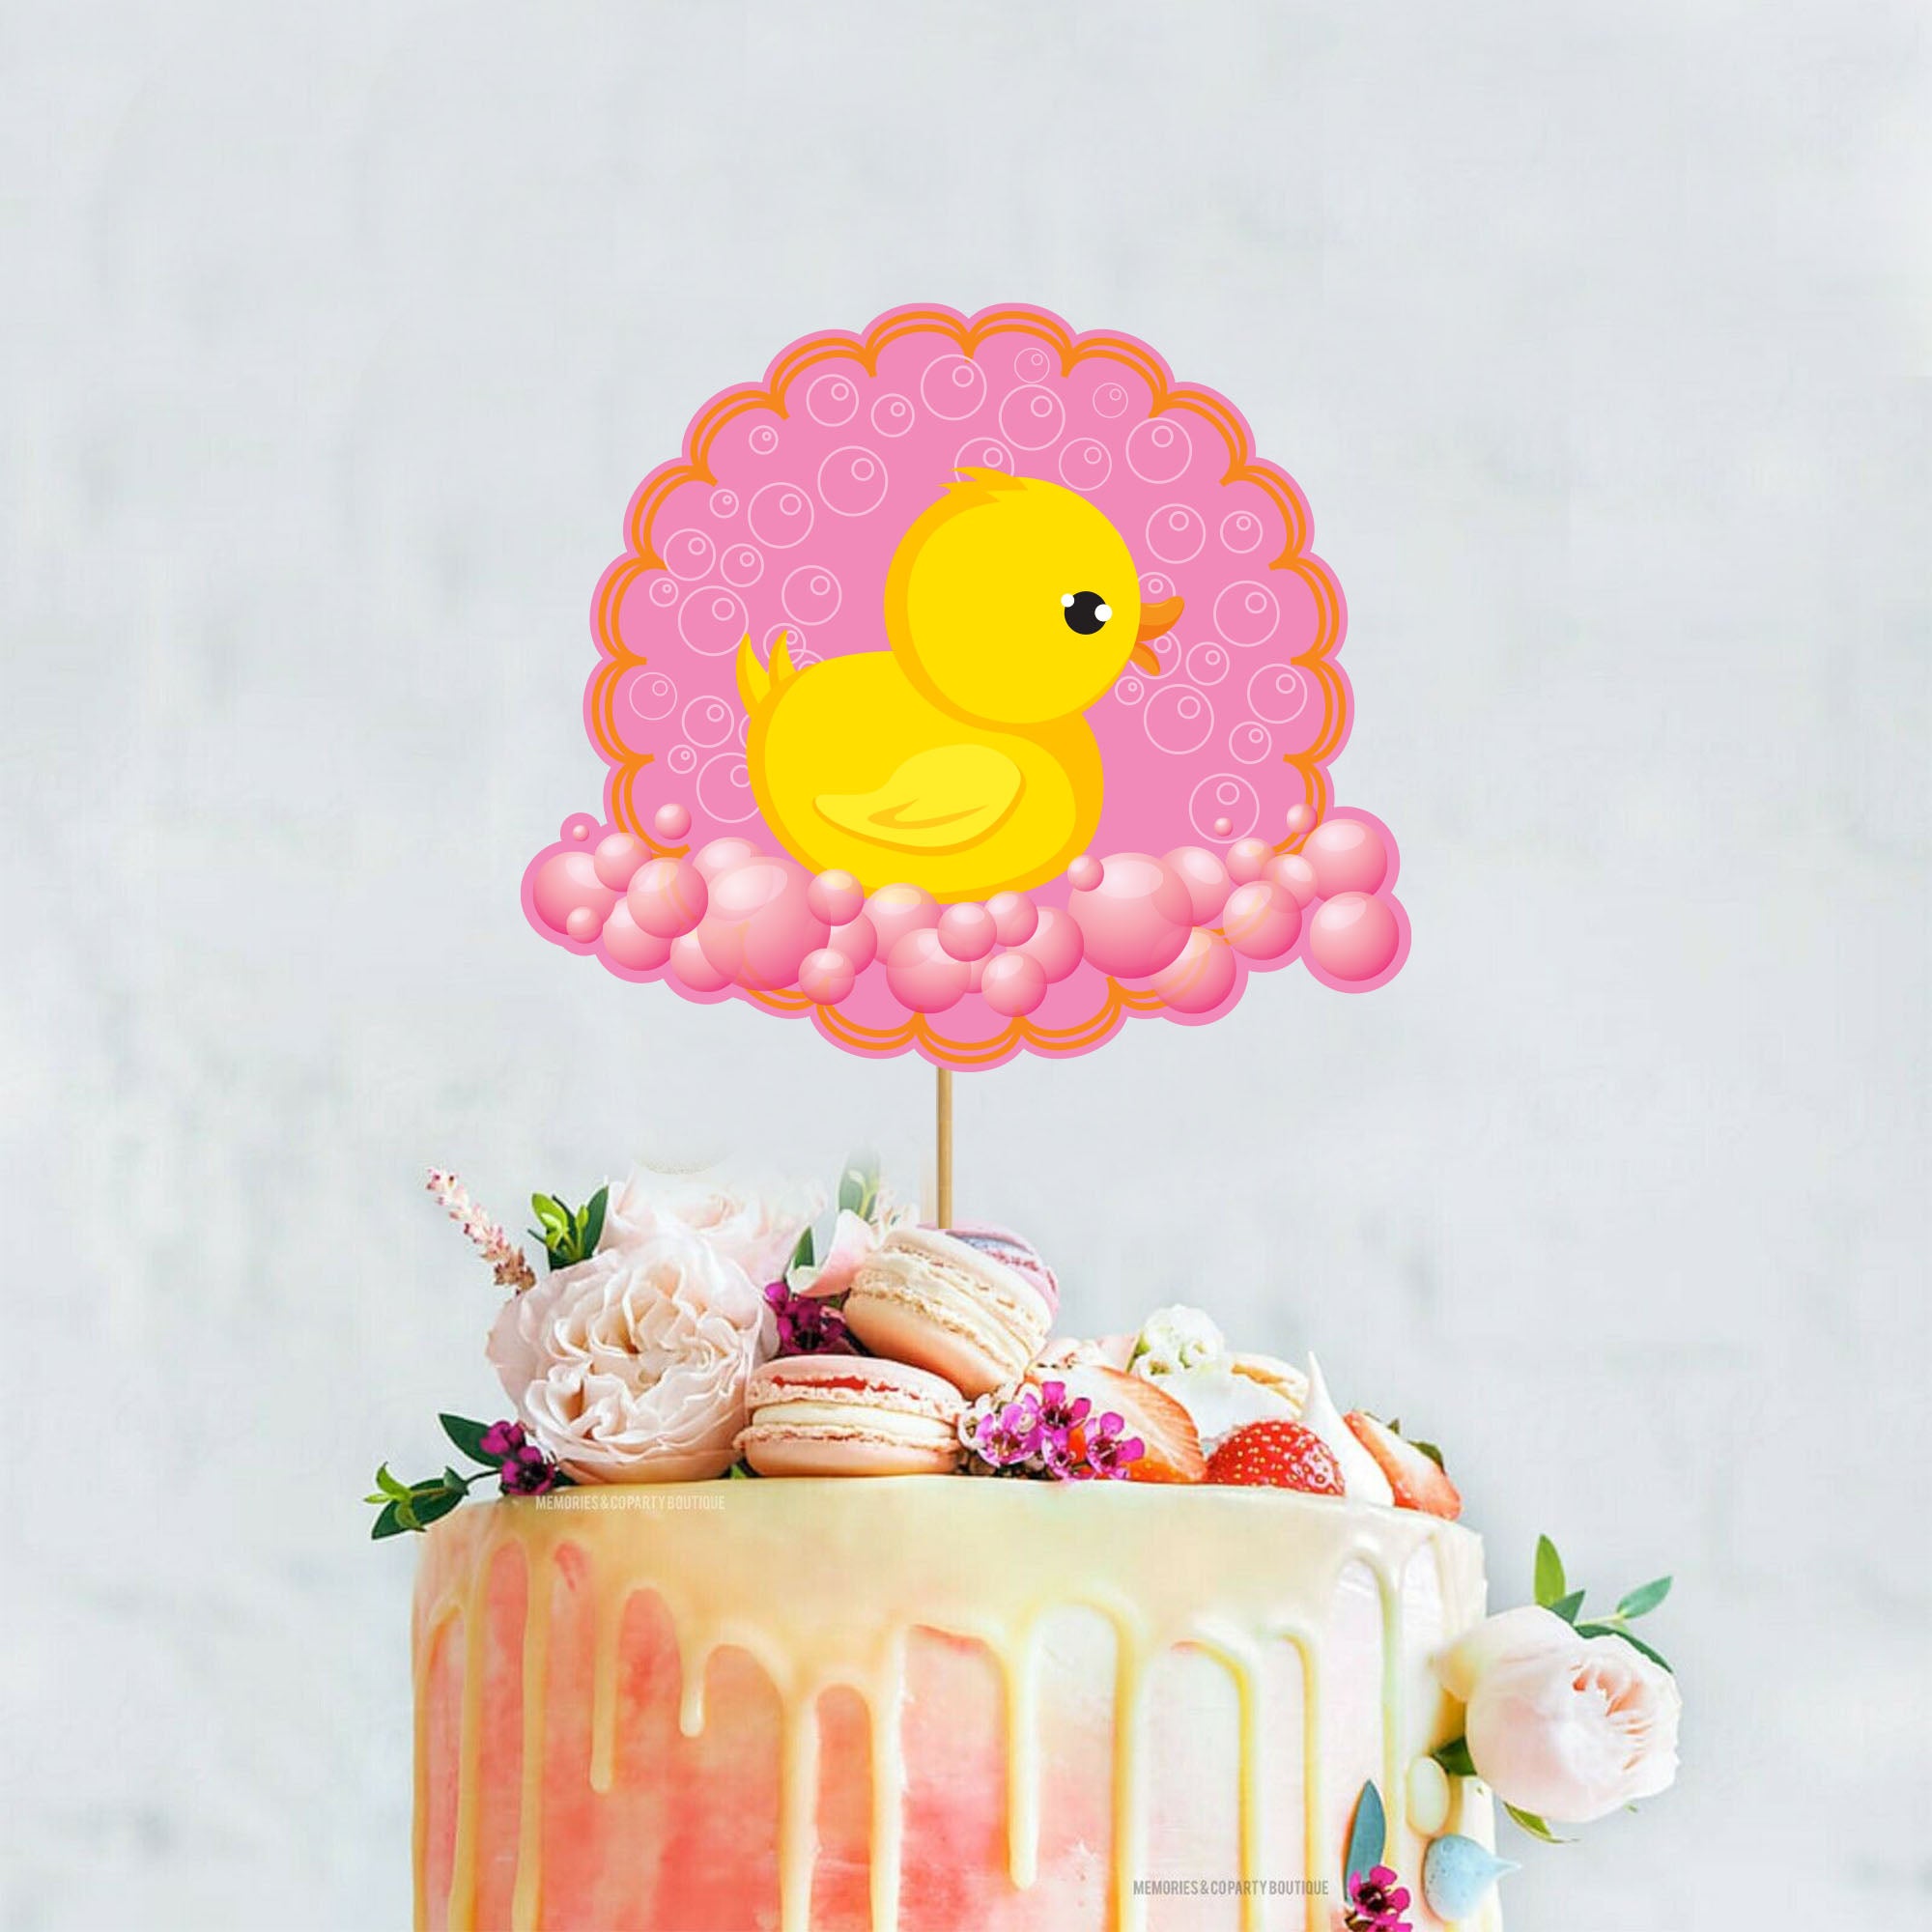 Rubber duck birthday cake - Pink Cocoa